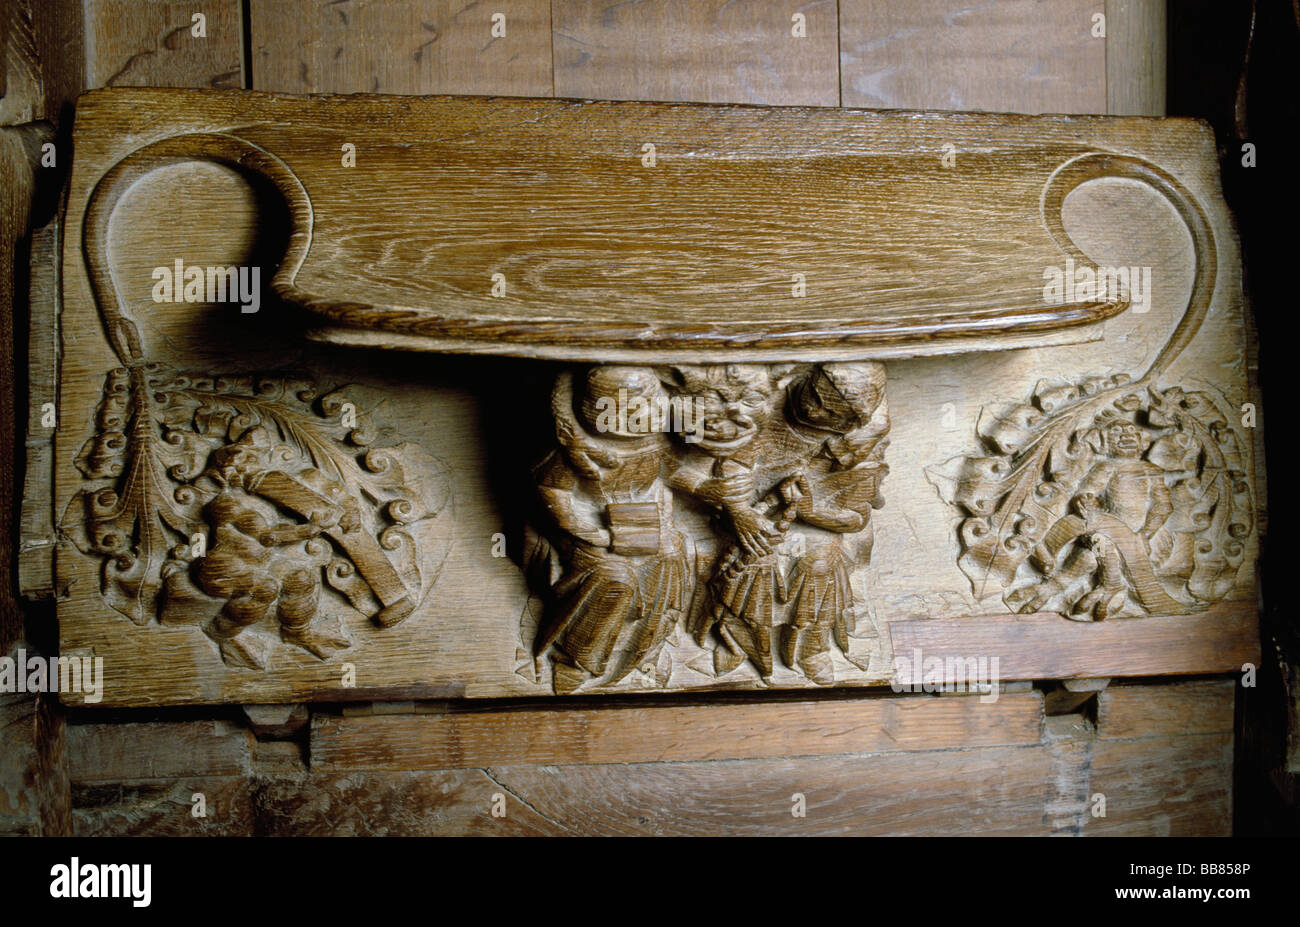 Ely Cathedral misericord Demon Stock Photo